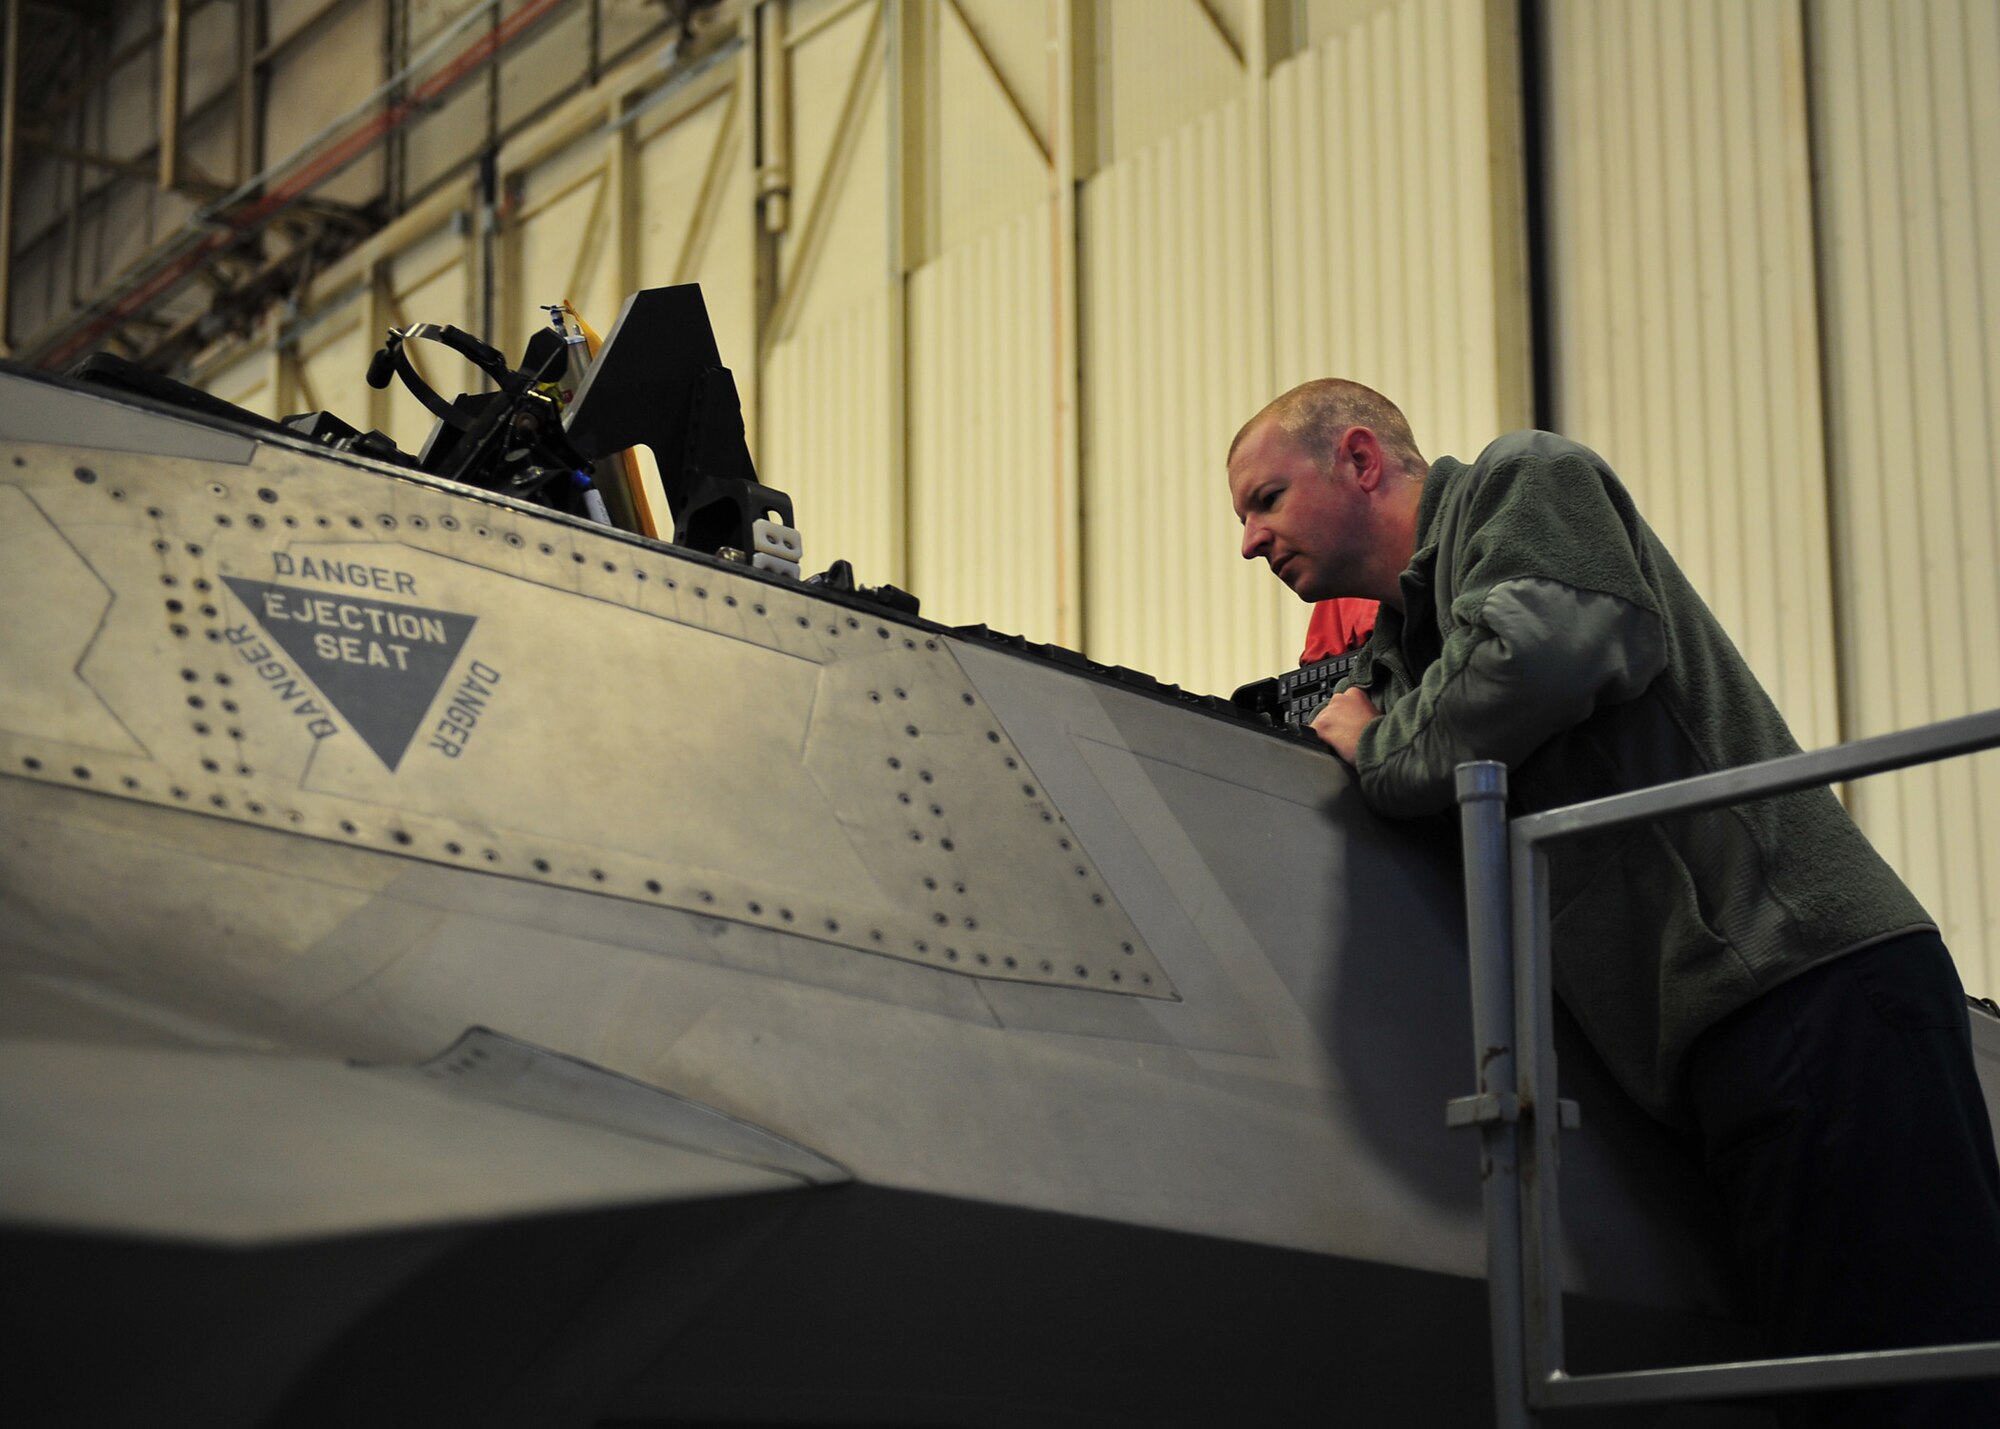 Staff Sgt. Michael Cantrell, 95th Air Maintenance Unit dedicated crew chief, inspects various ejection and pilot safety components in the cockpit of an F-22 Raptor, Jan. 15 in Hangar 1. Tyndall recently gained several combat ready F-22 Raptors from Holloman Air Force Base, N.M. Those jets must undergo an acceptance process in order to call Tyndall their home. (U.S. Air Force photo by Airman 1st Class Dustin Mullen)